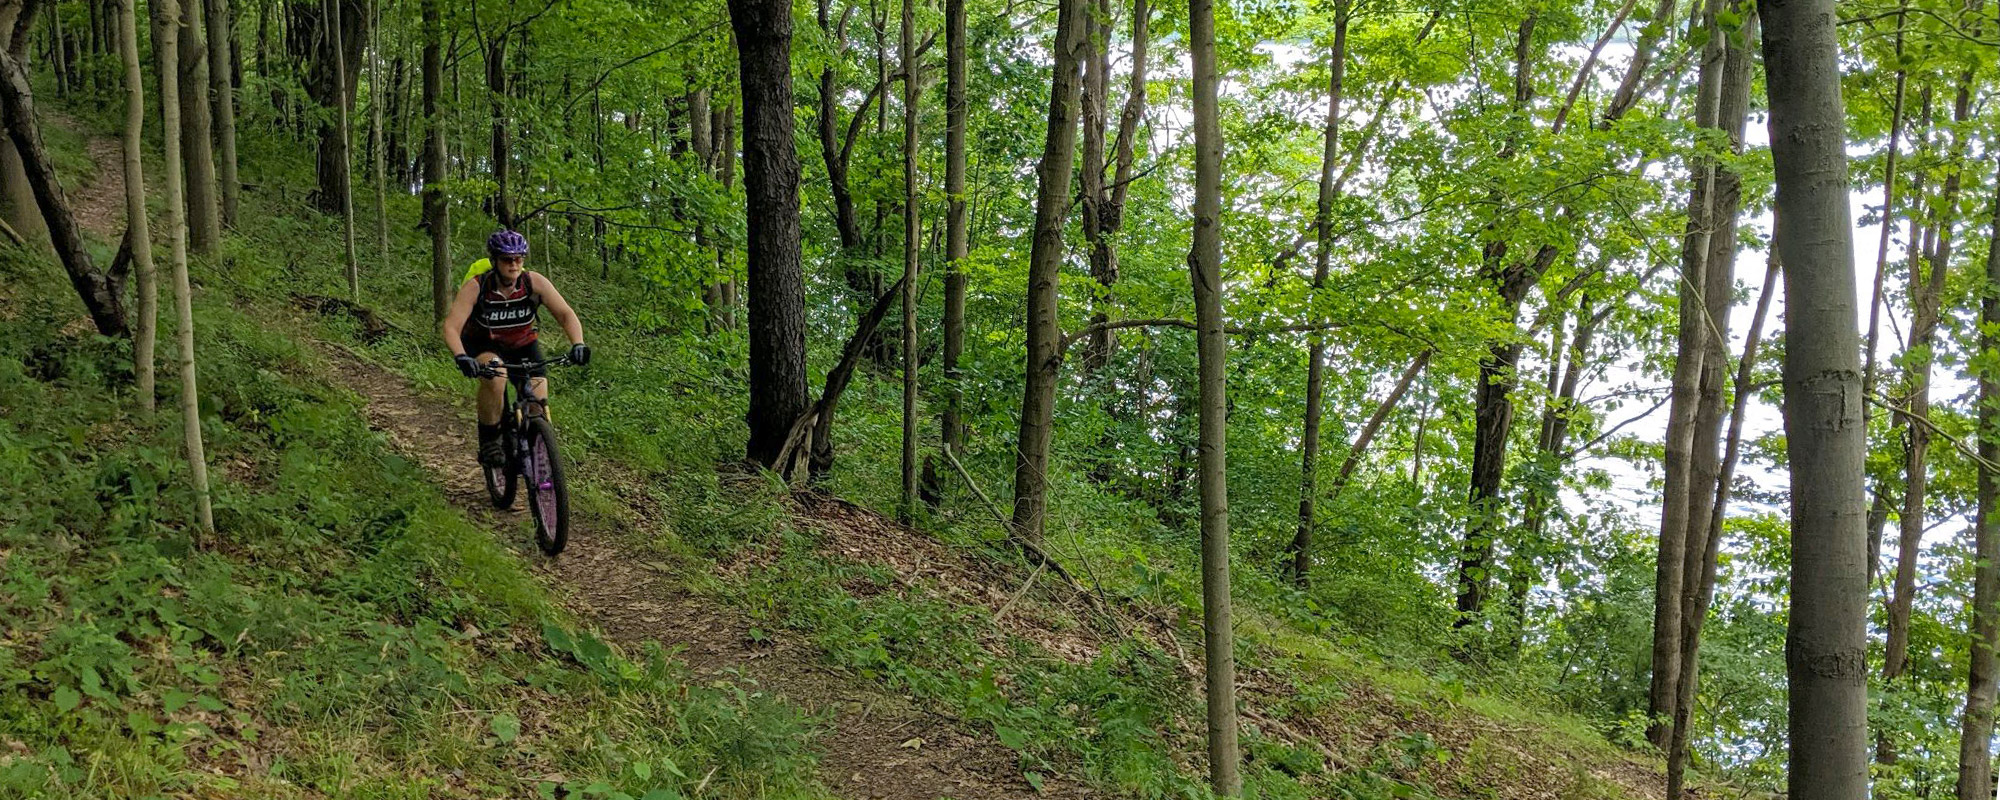 A woman rides a mountain bike on a wooded trail